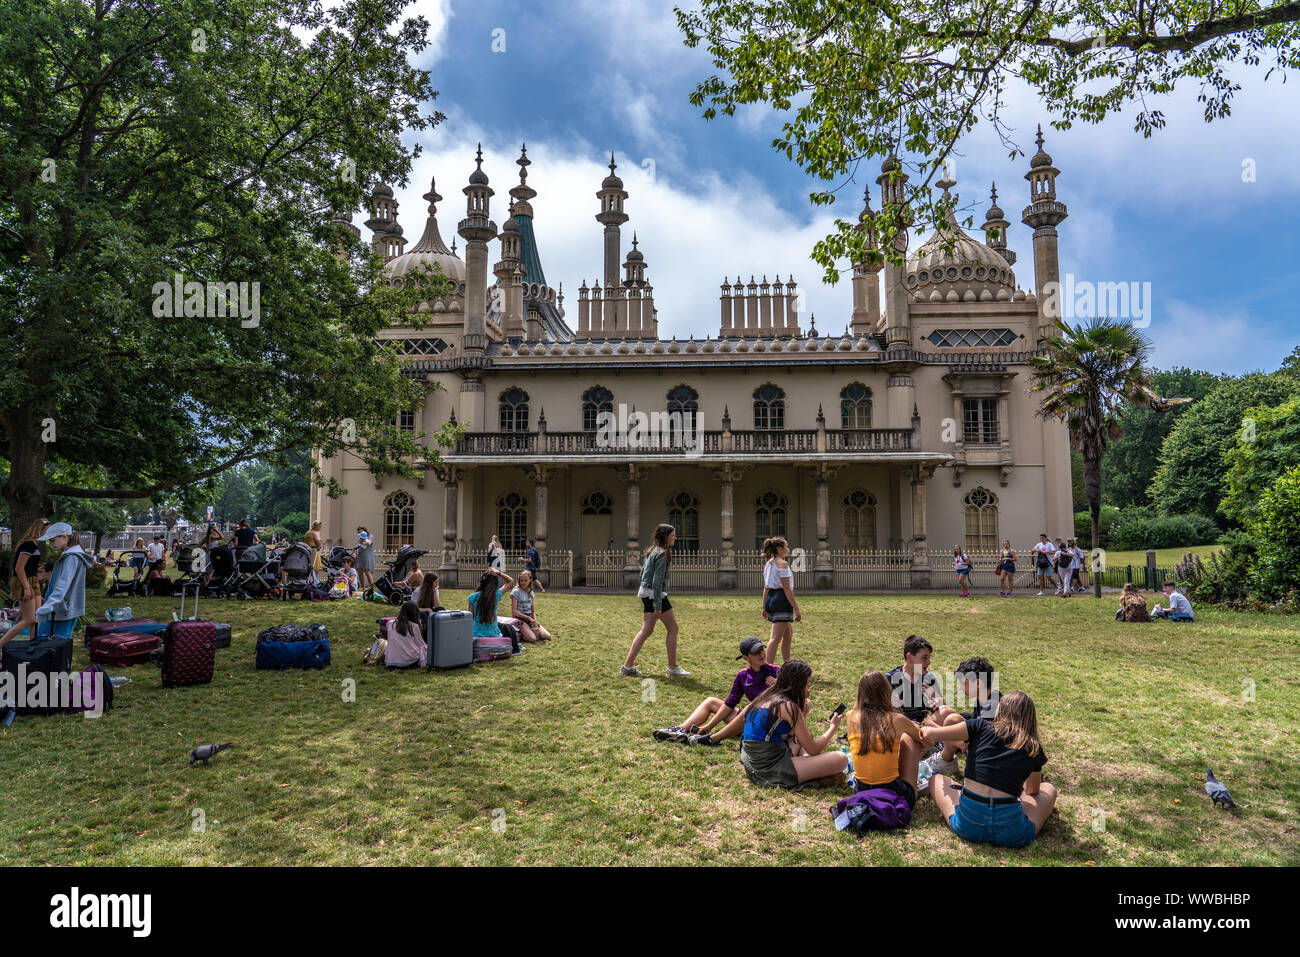 BRIGHTON, UNITED KINGDOM - JULY 24: View from the gardens at the Royal Pavilion, an historic landmark and popular tourst destination on July 24, 2019 Stock Photo